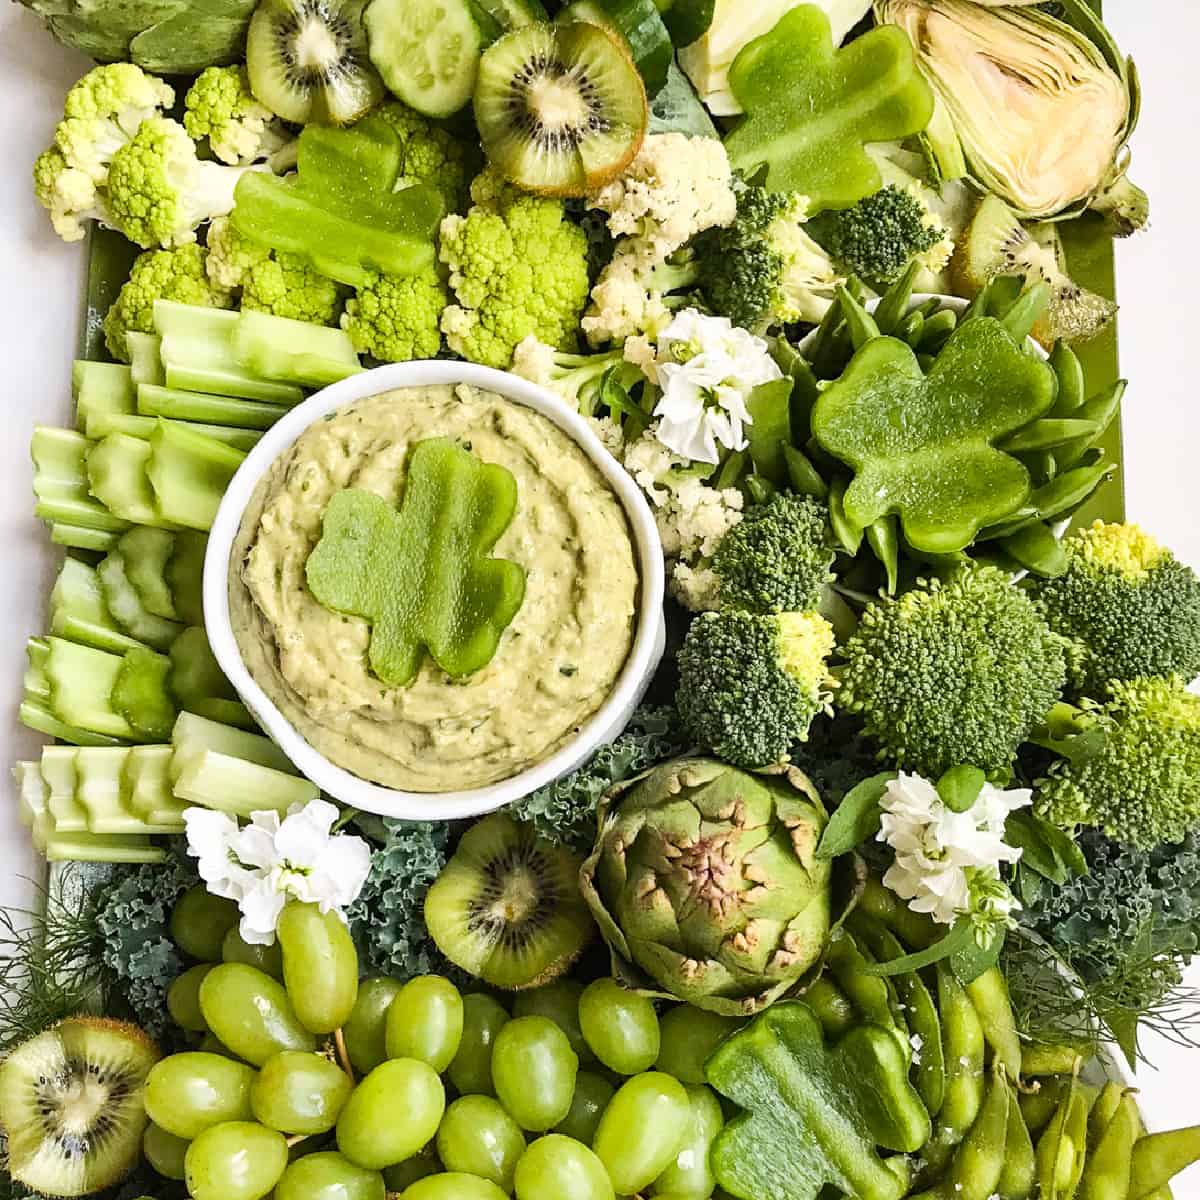 A green relish tray filled with all green vegetable and a green dip with a shamrock garnish made from bell pepper.